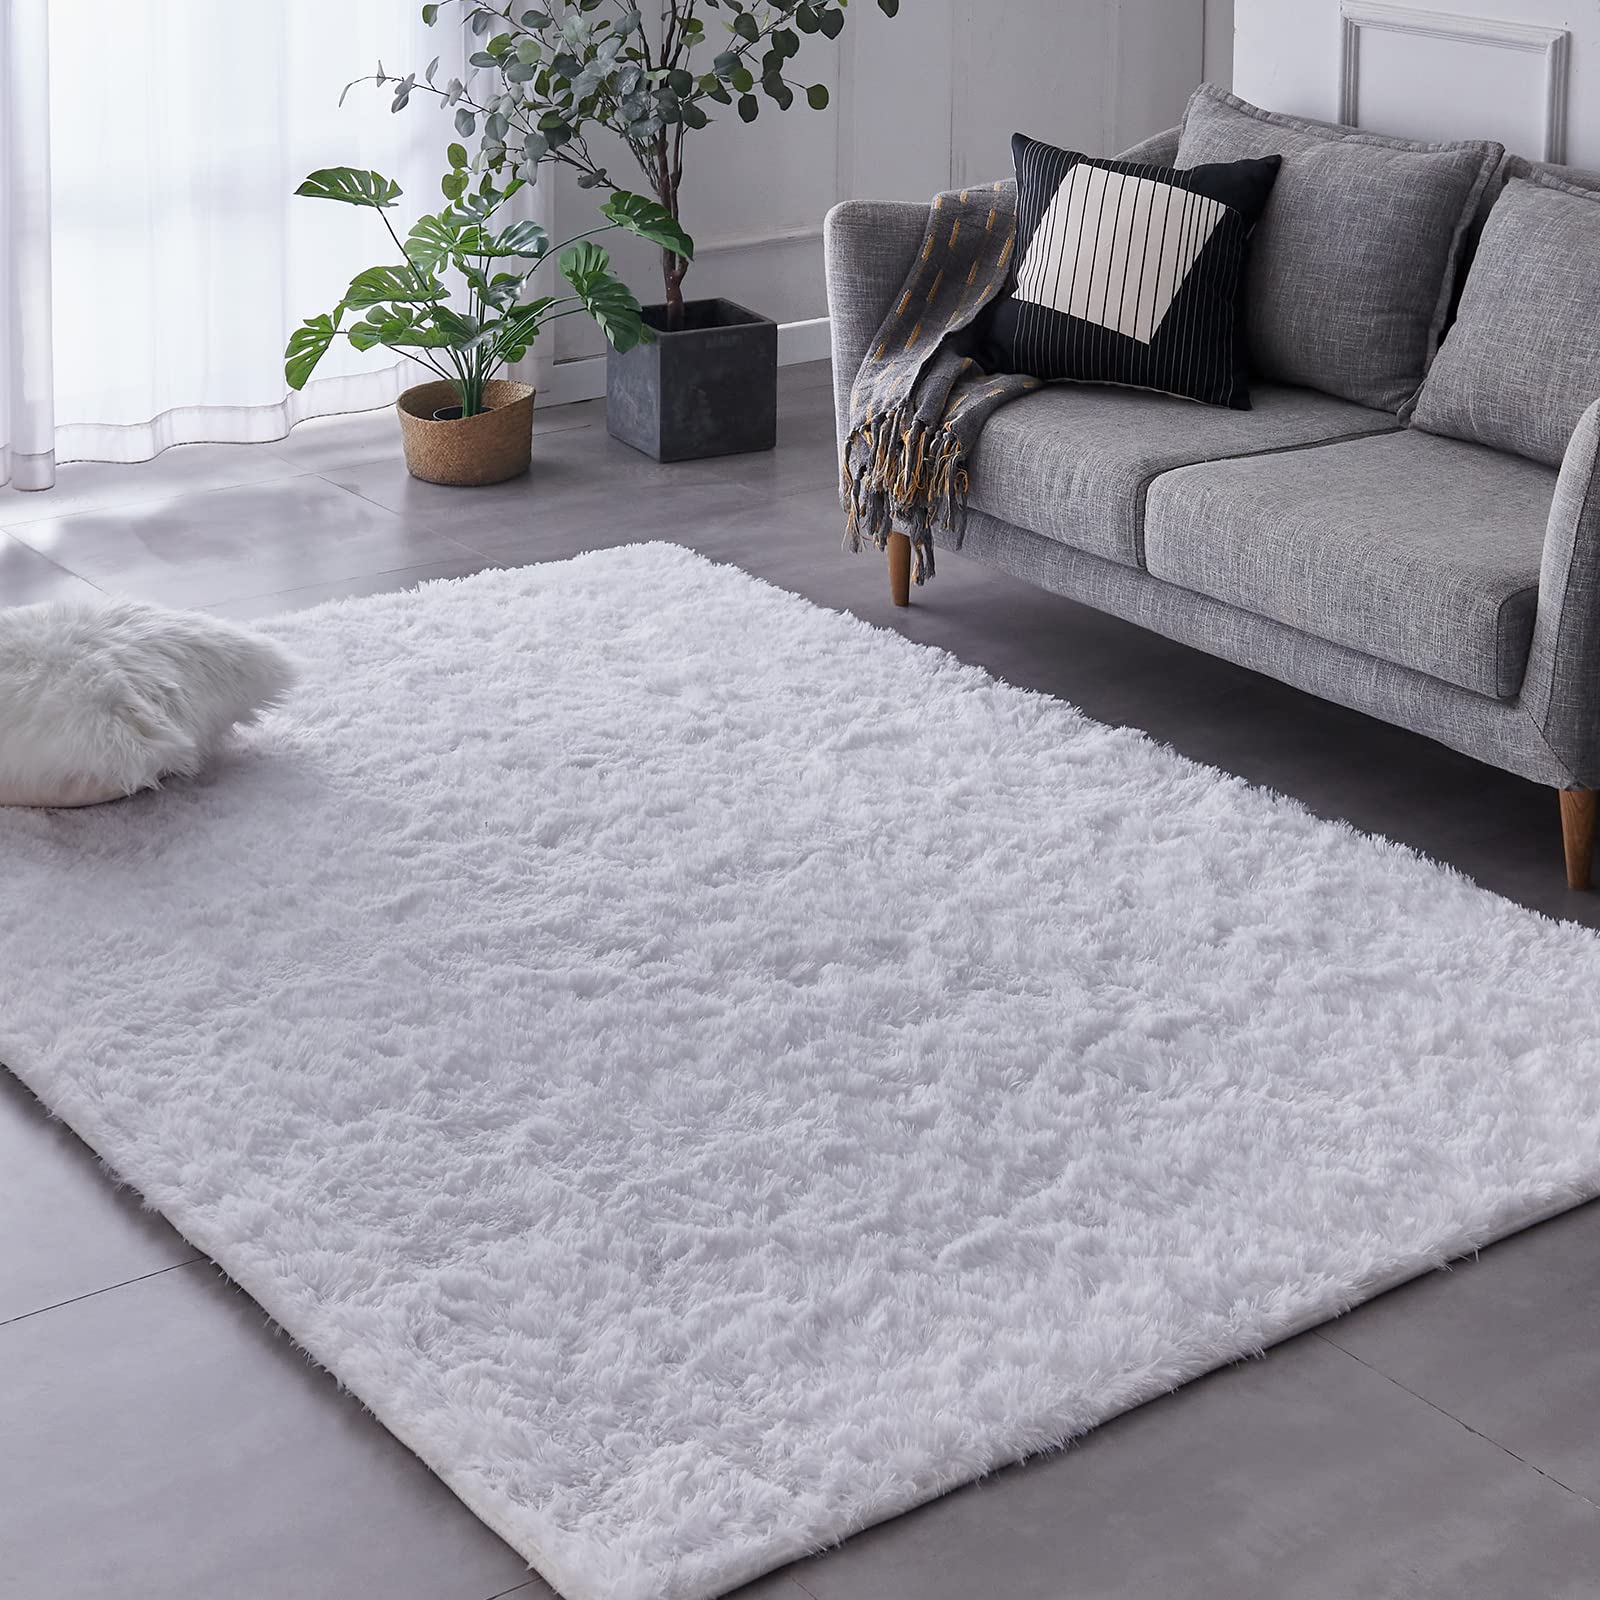 Buy TABAYON Shaggy White Rug, 2x3 Area Rugs for Living Room, Anti ...